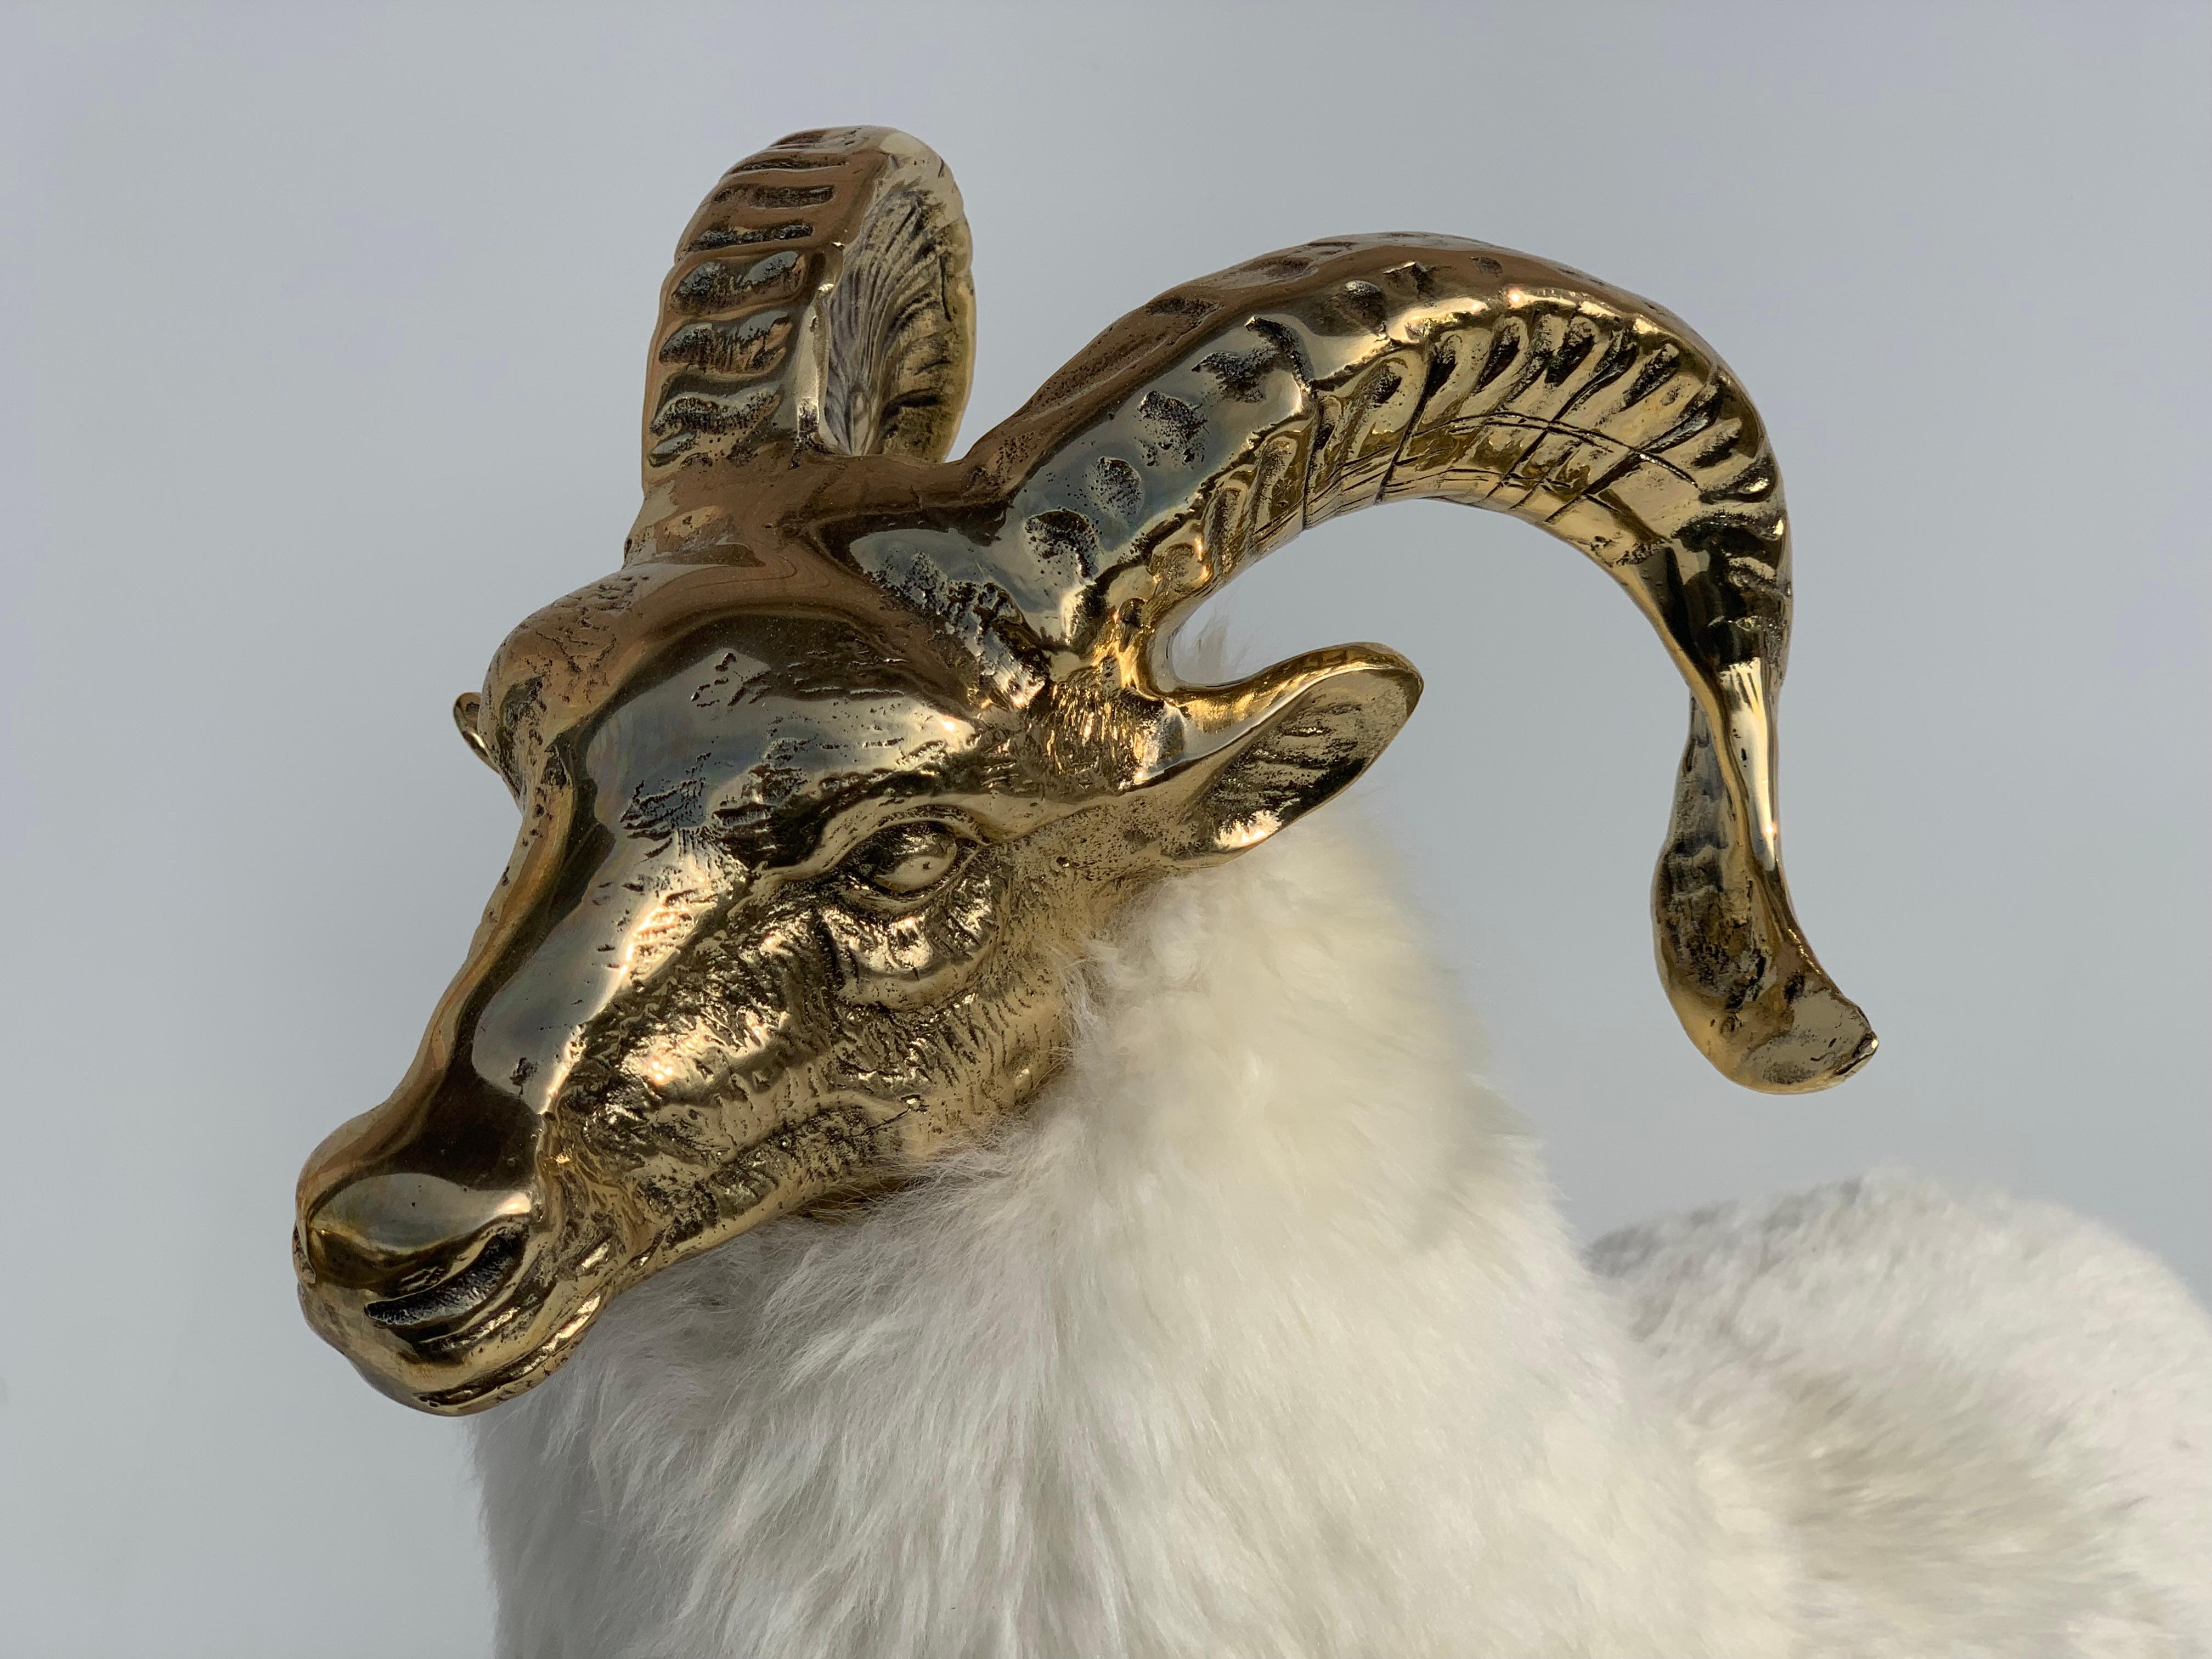 Polished Brass Mountain Sheep or Goat Sculpture